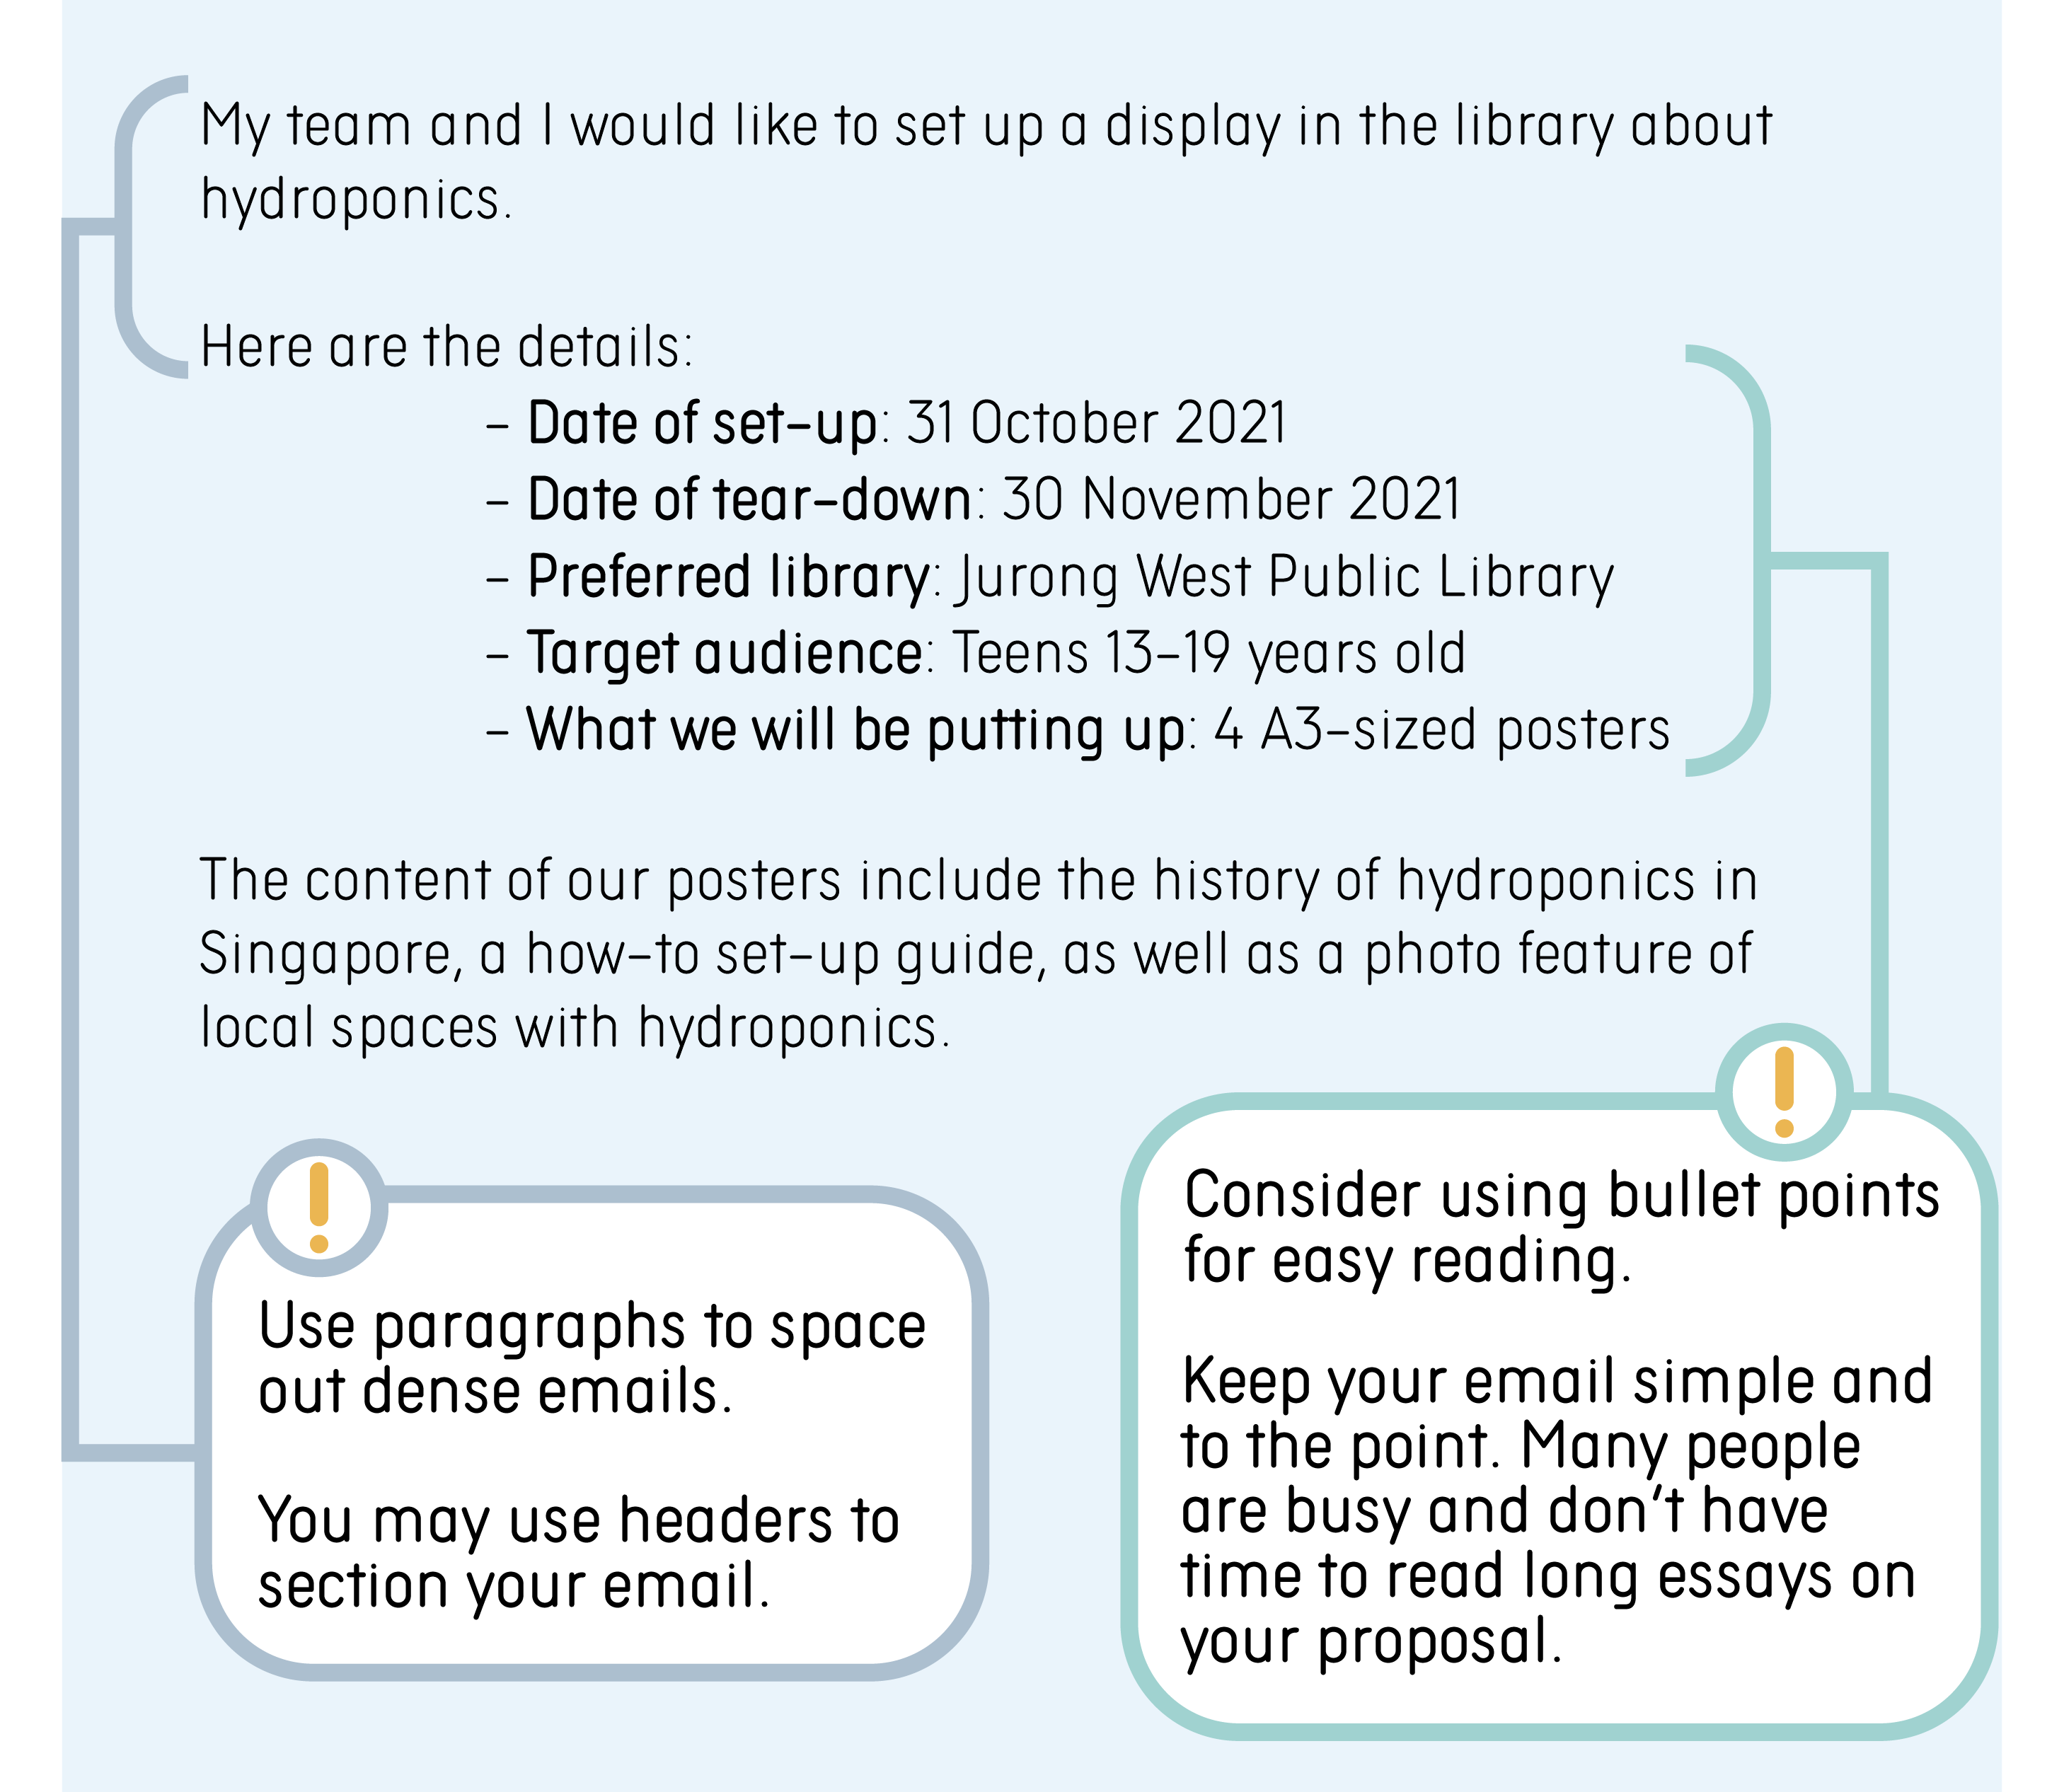 Tips: Keep your email simple and to the point. Many people are busy and don’t have the time to read long essays about your proposal. Consider using bullet points for easy reading. Write all abbreviations in full the first time it’s being mentioned in the email e.g. National Library Board (NLB). Use paragraphs to space out dense emails. You may use headers to section your email. Example: My team and I would like to set up a display in the library about hydroponics. Here are the details: Date of set-up: 31 October 2021. Date of tear-down: 30 November 2021. Preferred library: Jurong West Public Library. Target audience: Teens 13-19 years old. What we will be putting up: 4 A3-sized posterboards. The content of our posters include the history of hydroponics in Singapore, a how-to set-up guide, as well as a photo feature of local spaces with hydroponics.